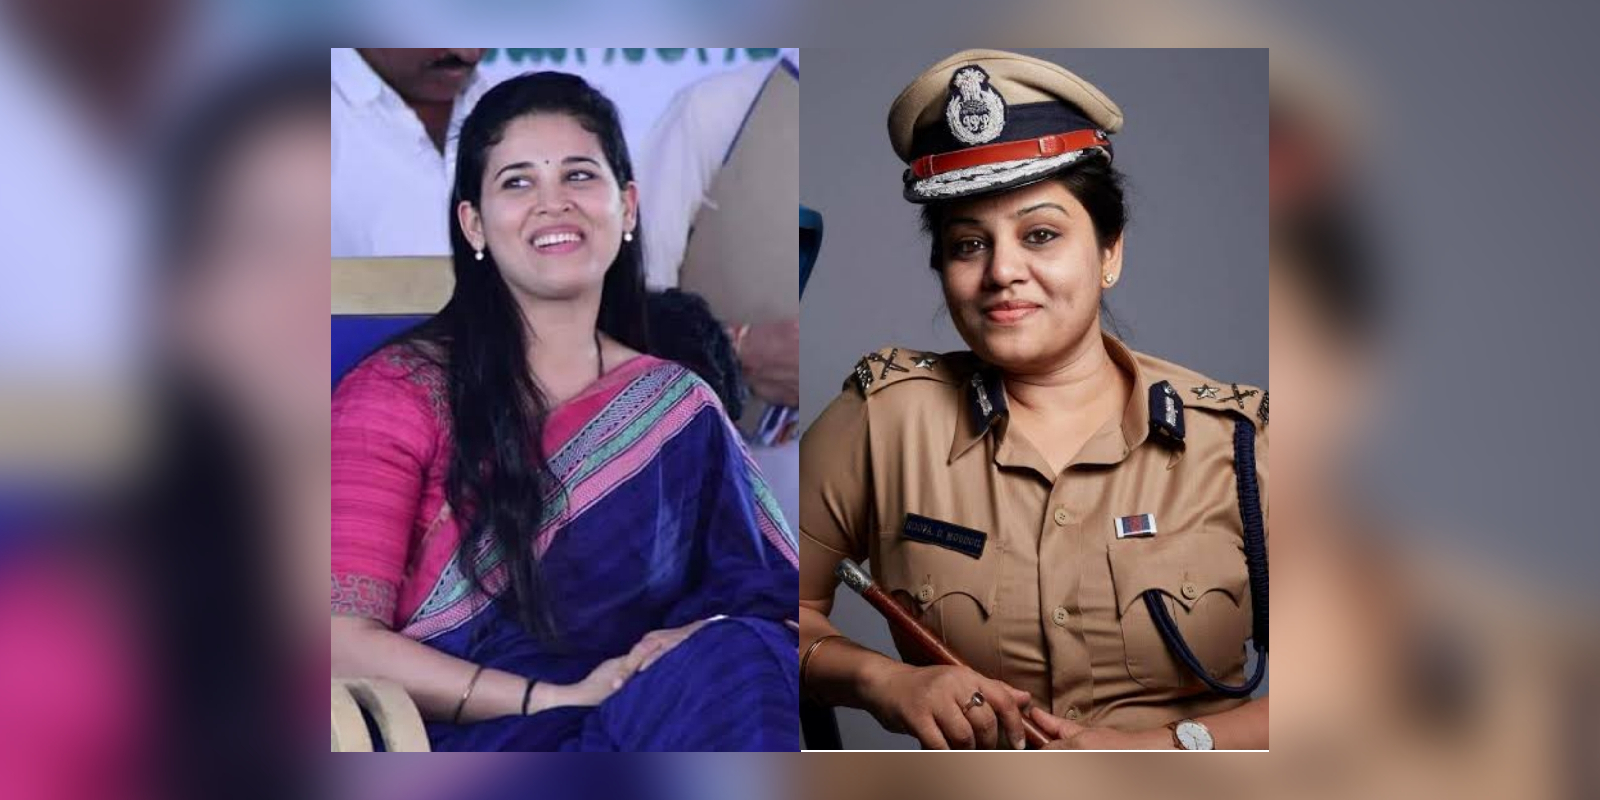 Spat between women officers Rohini Sindhuri IAS and Roopa IPS